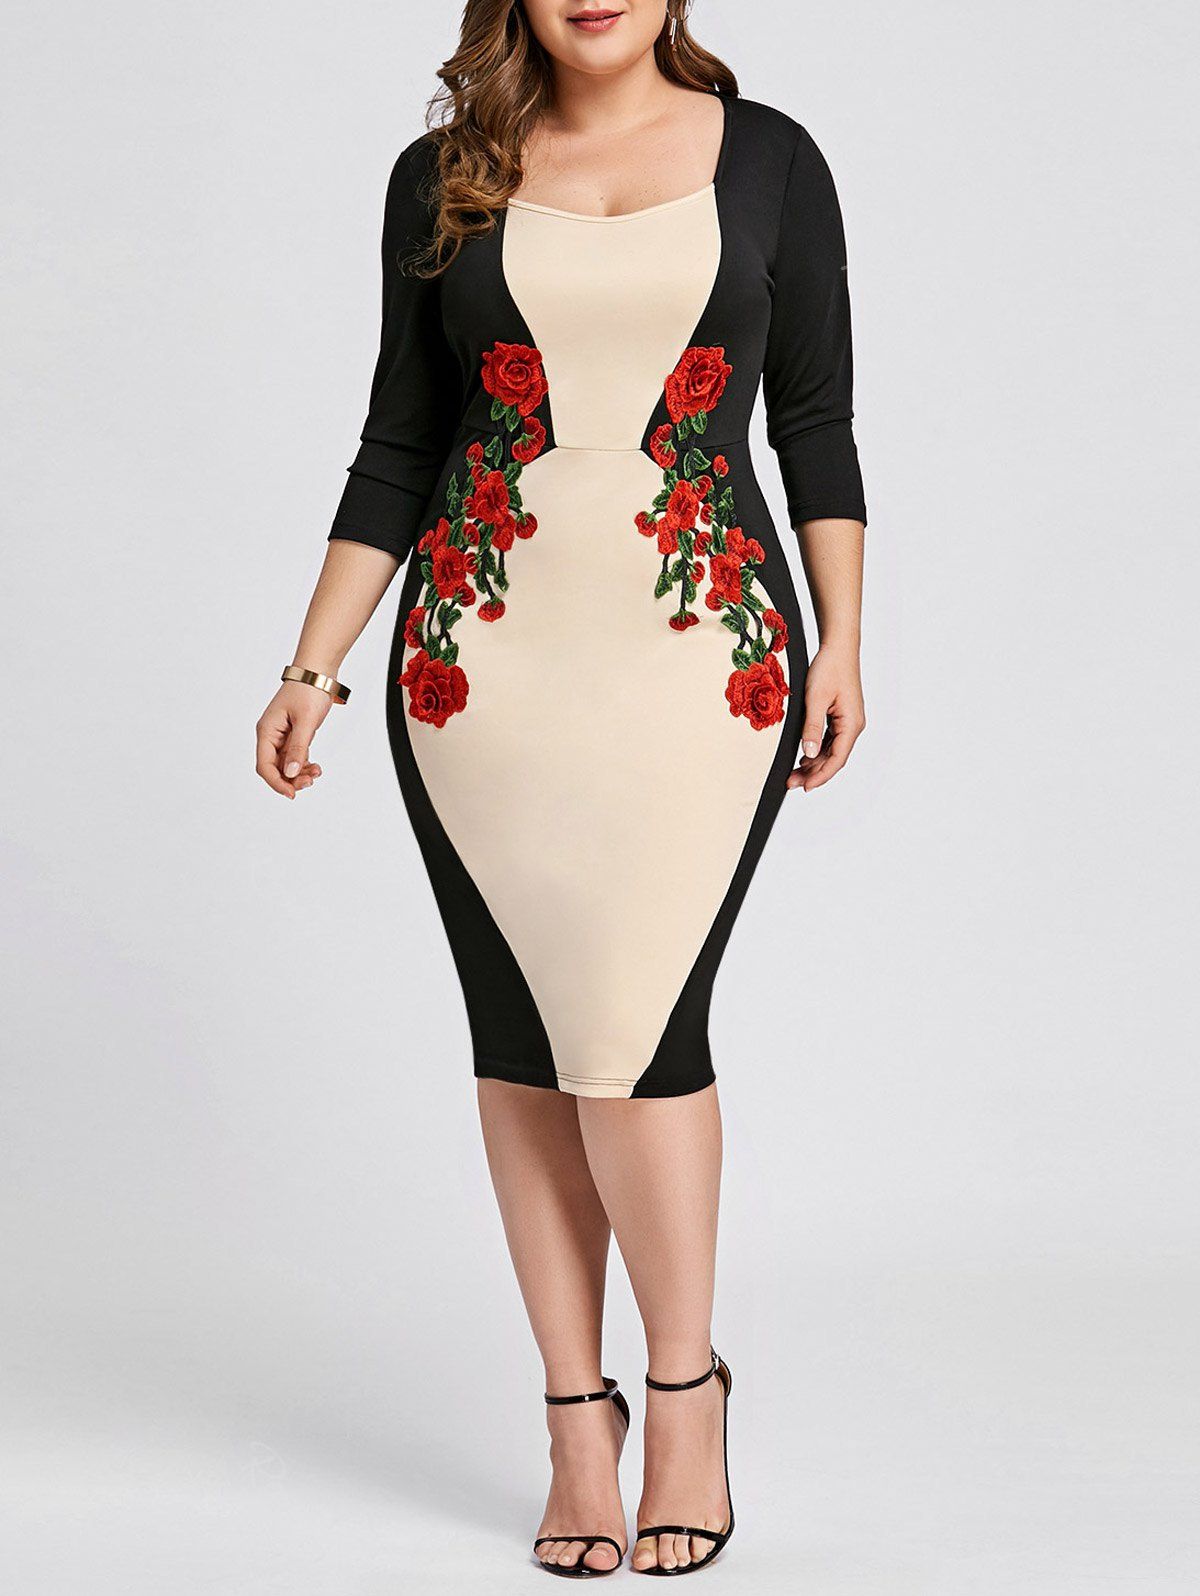 Like venus bodycon dress for skinny girl and girls plus size